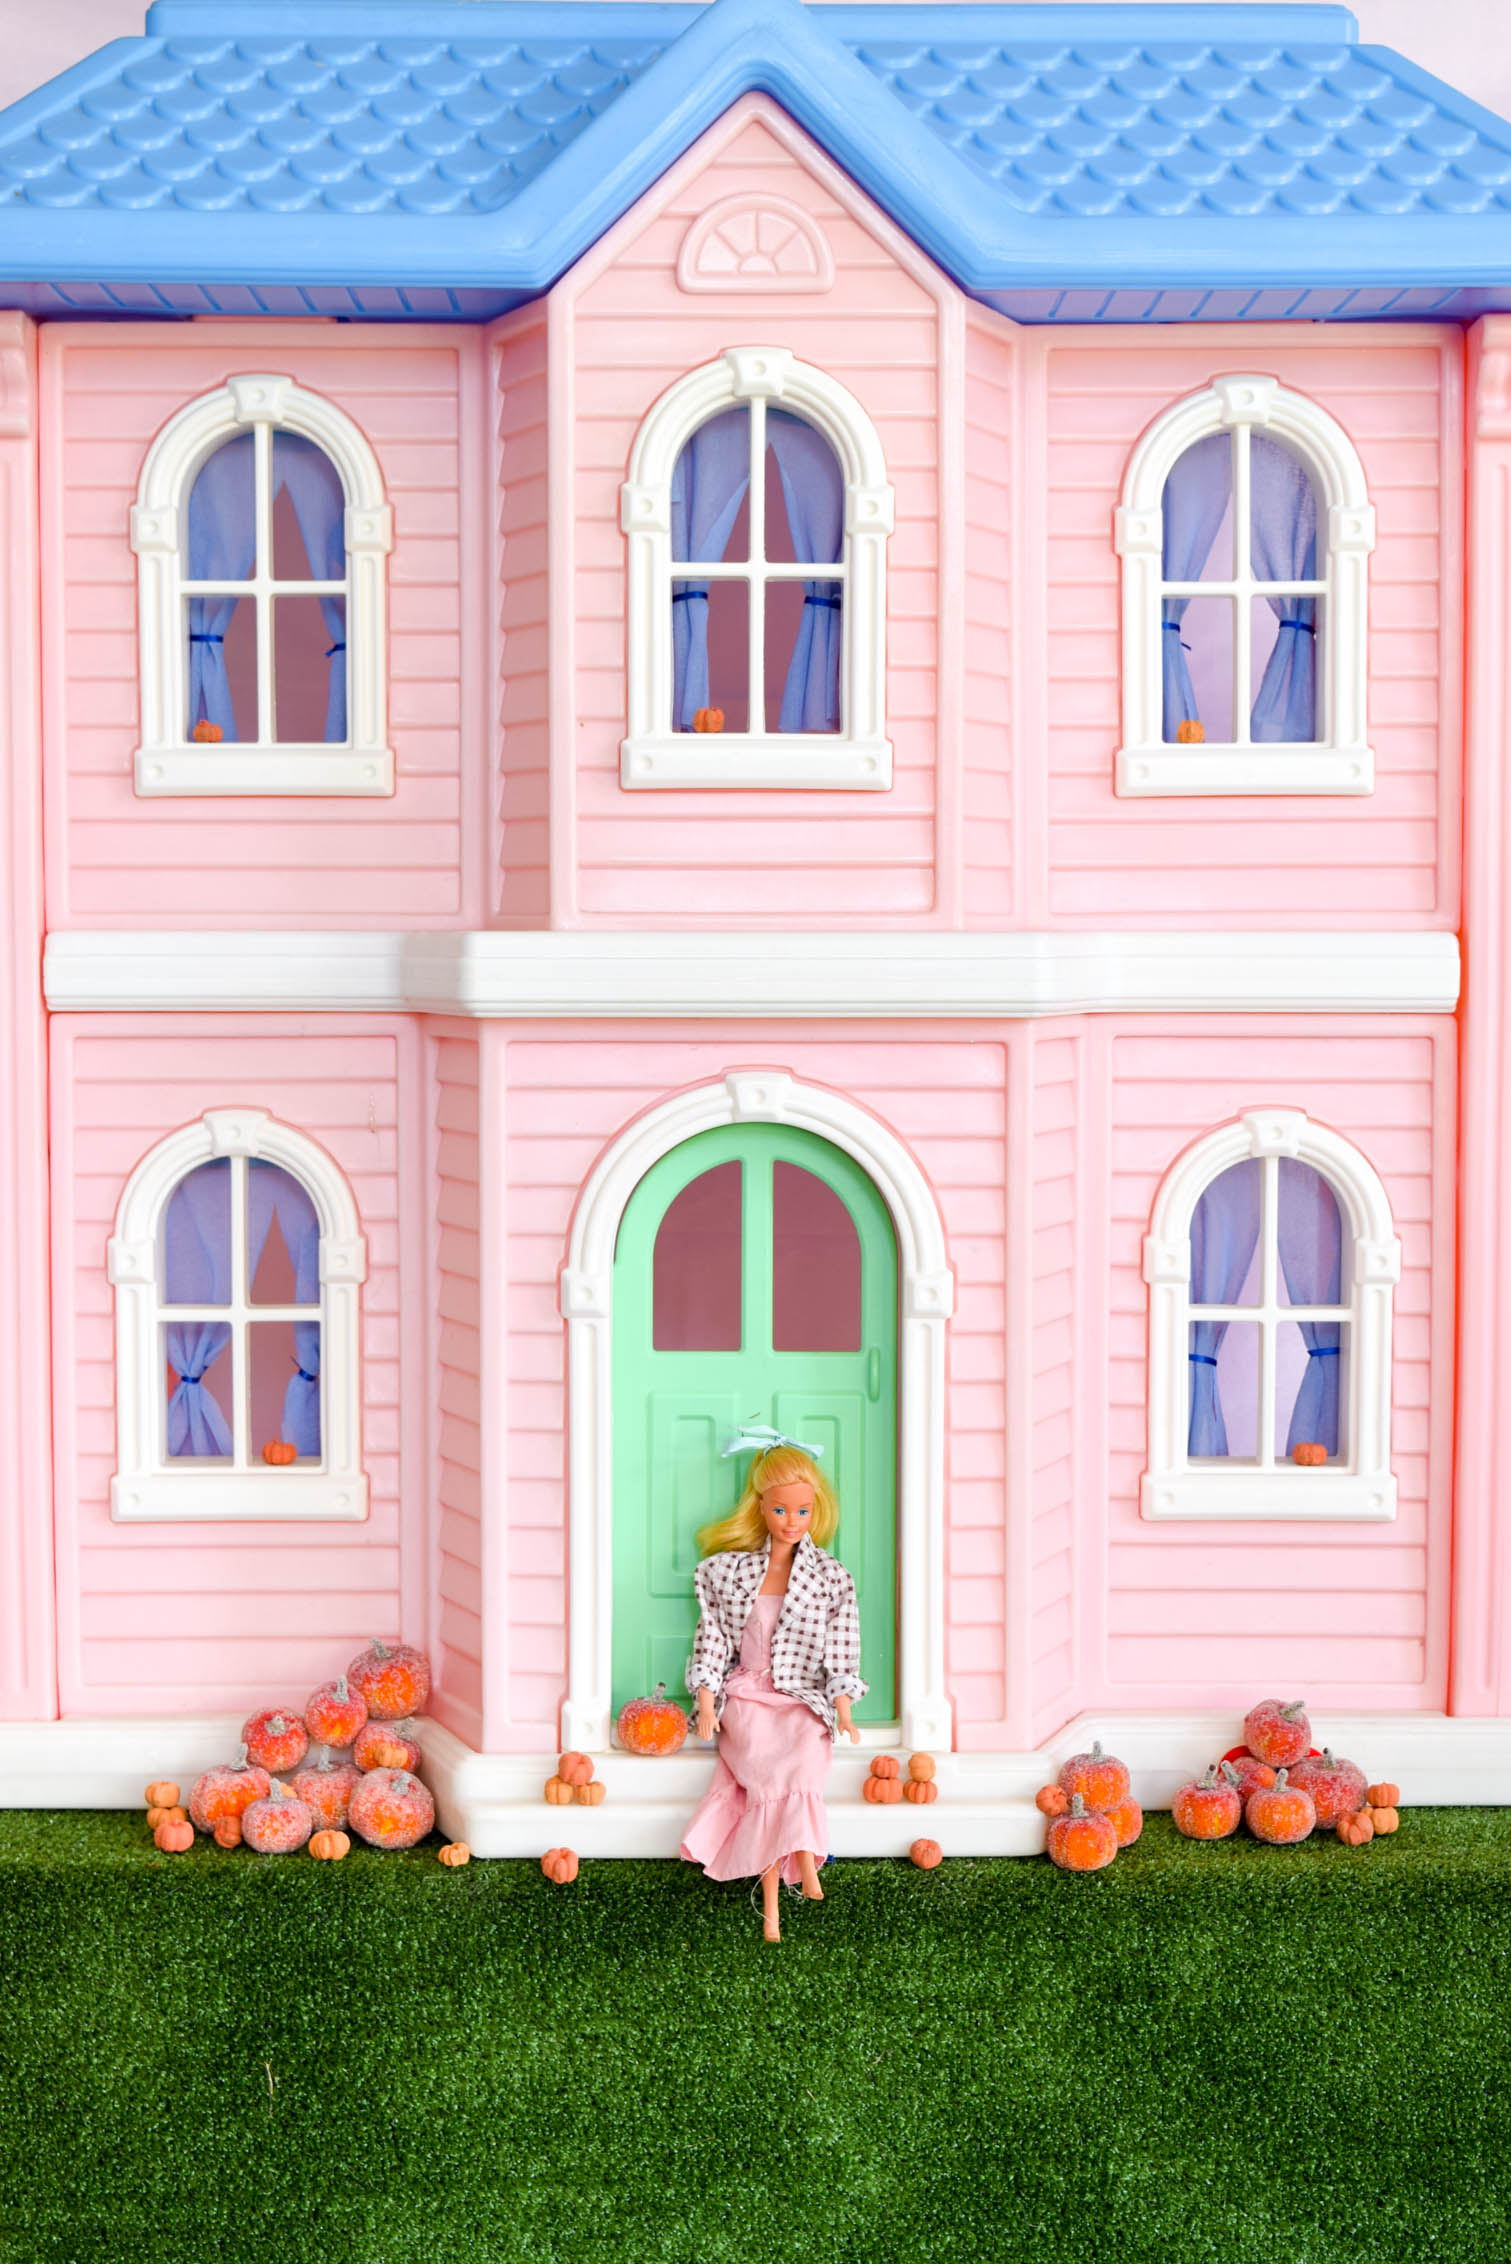 Fall Barbie Dream House Wallpaper Downloads • PMQ for two